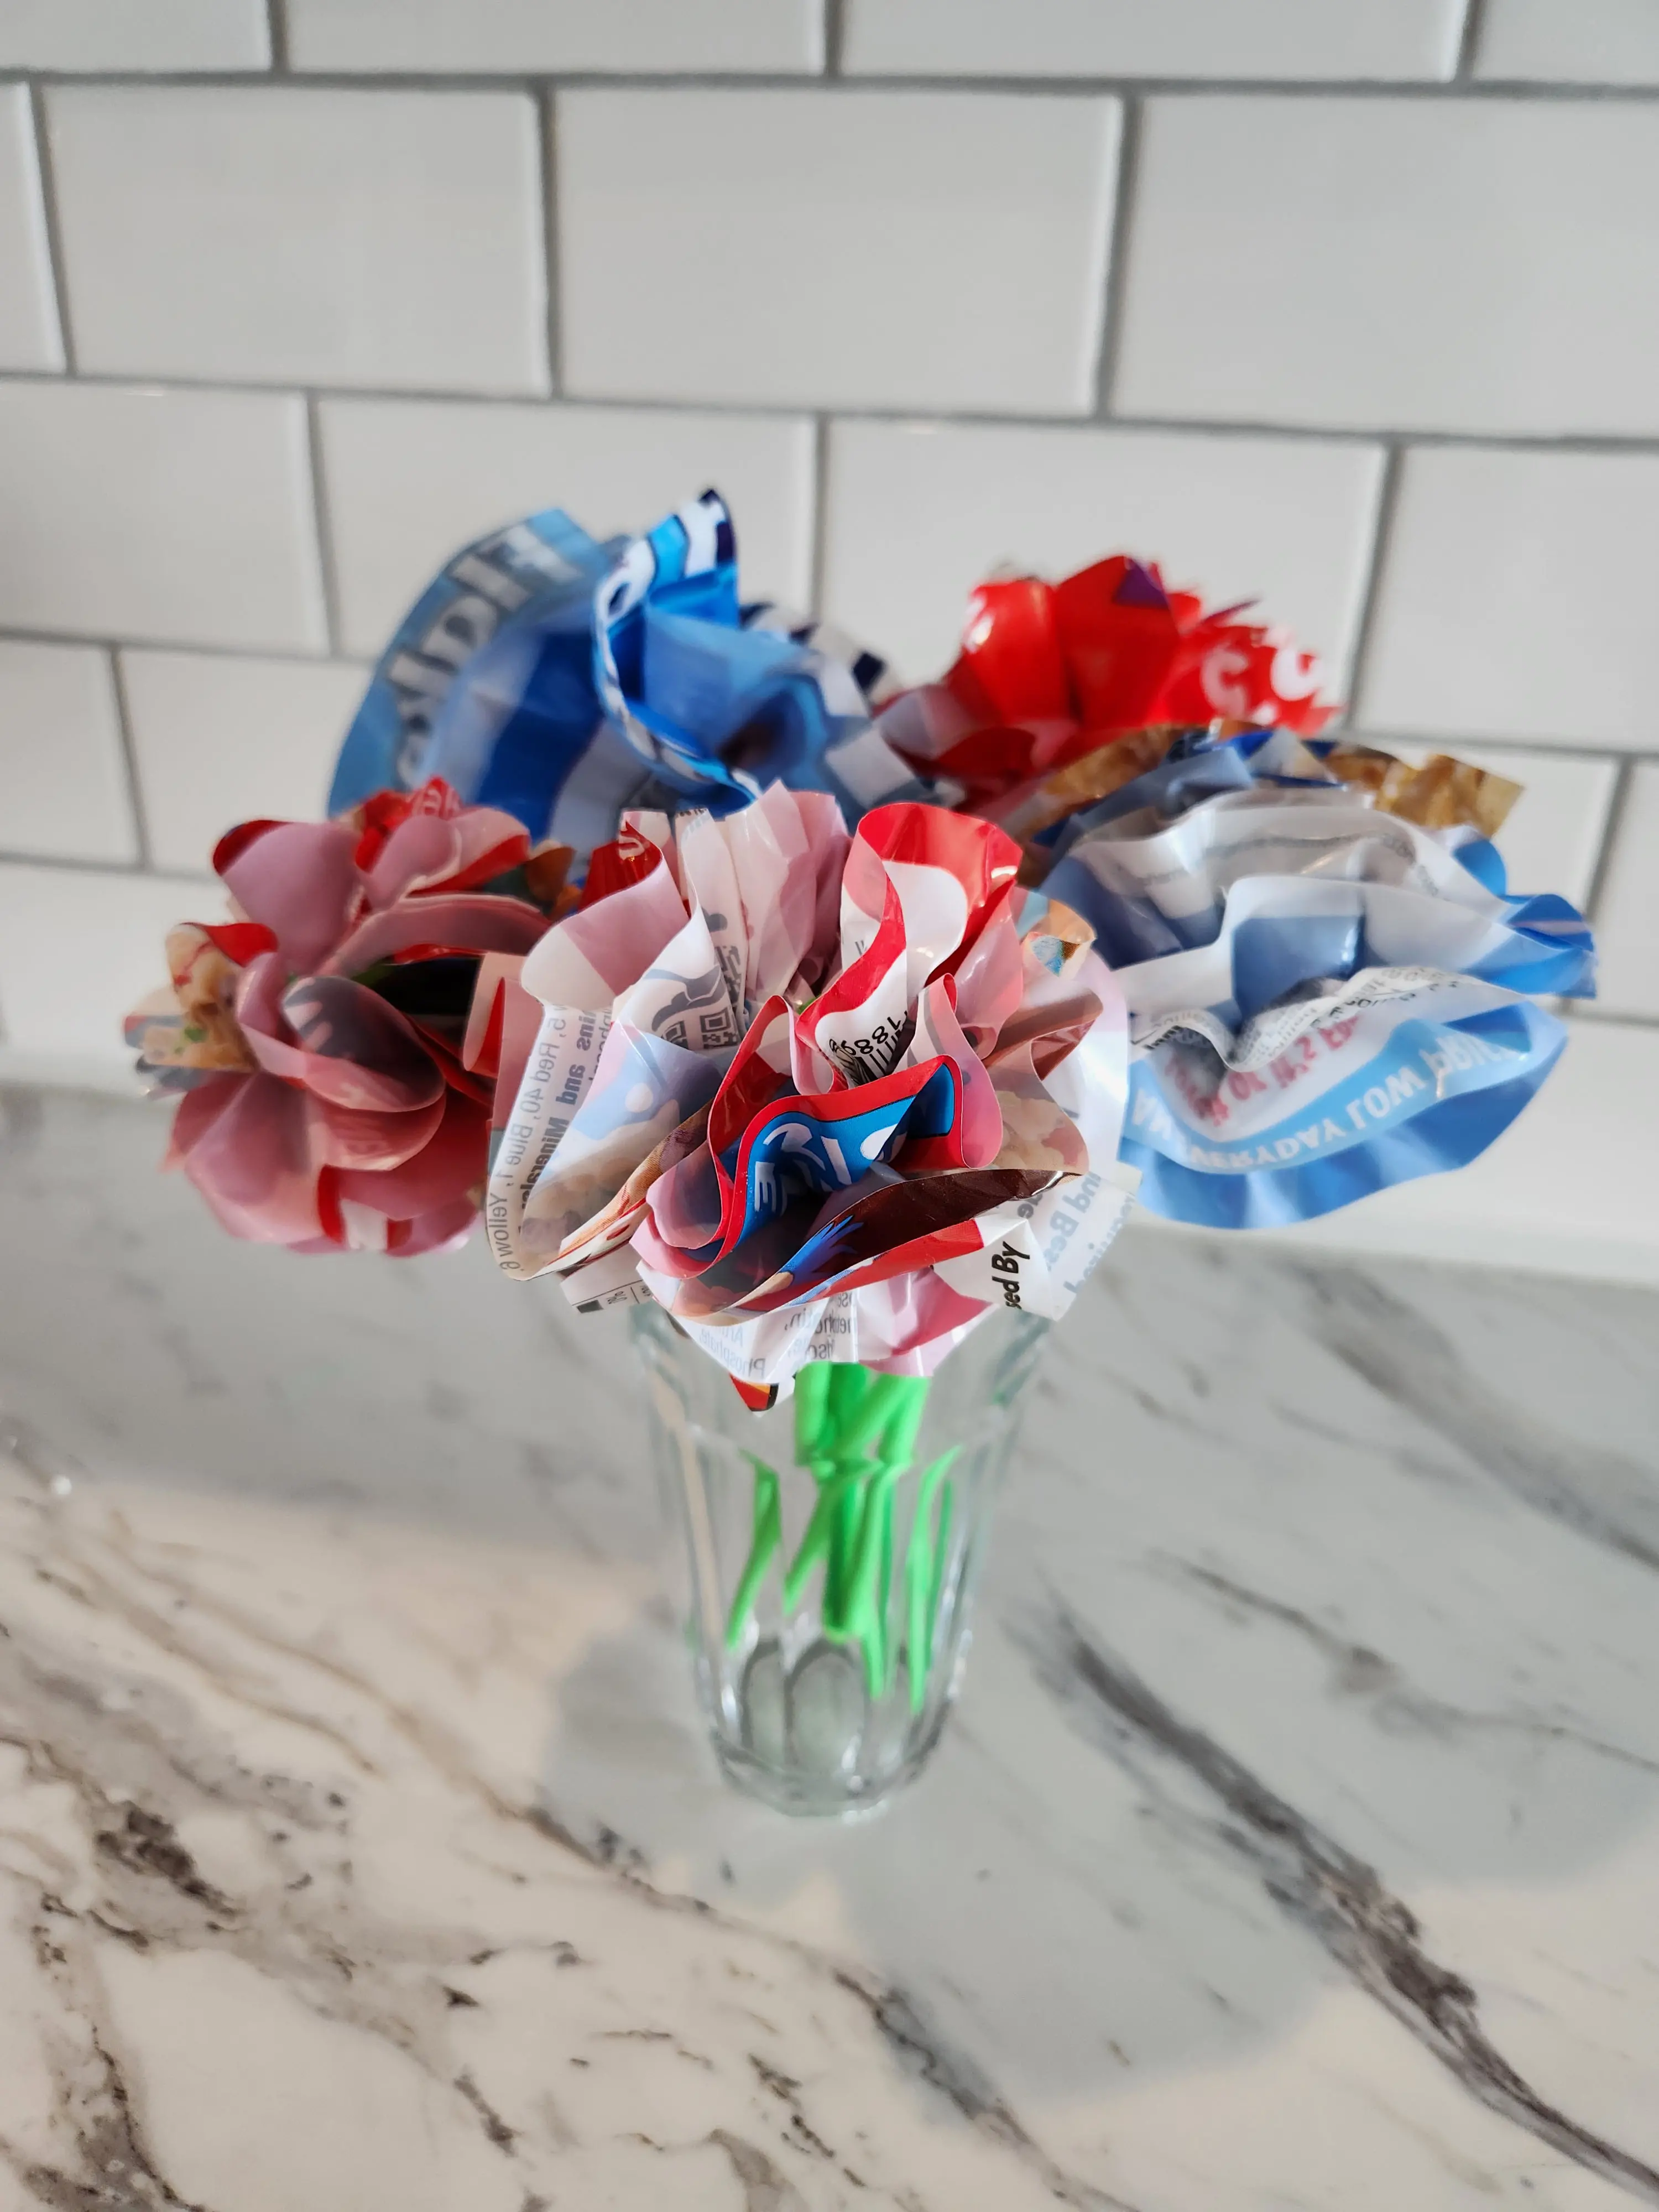 A bouquet of flowers made out of cereal bags